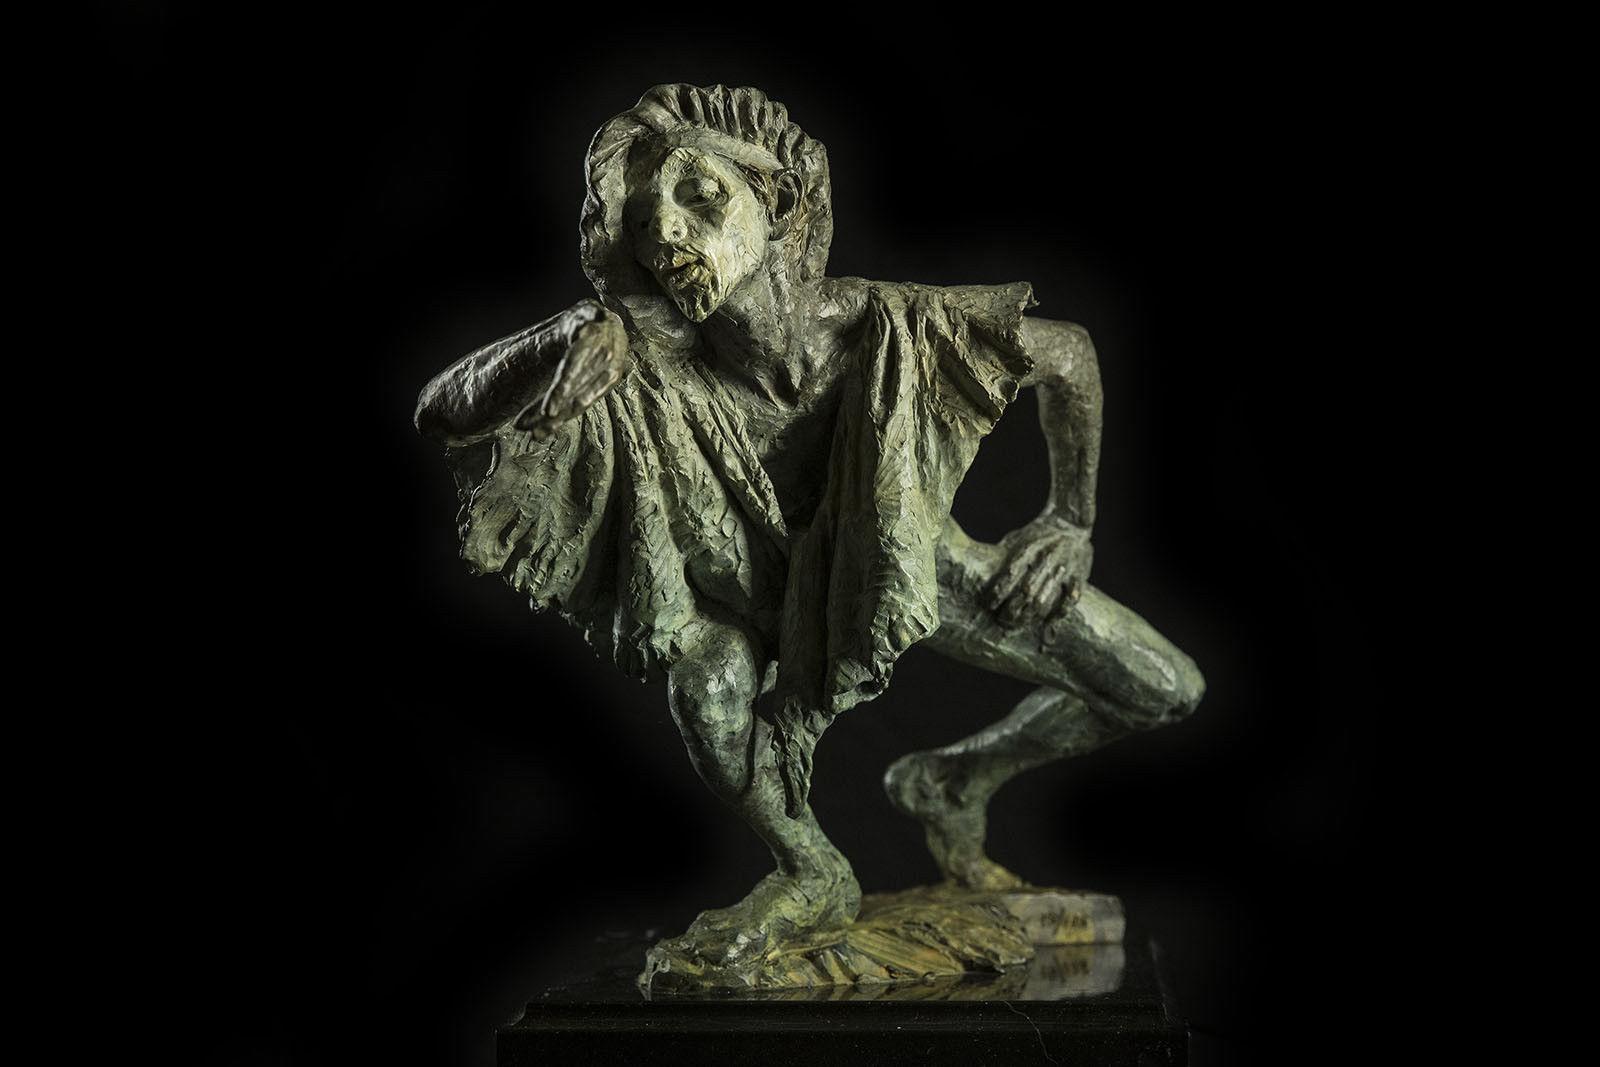 Sold Out Edition.  First to meet our bottom line by submitting their best offer will take this beautiful piece home.

Richard Macdonald - La Fuite du Temps
Catalog: Mime
Retail: $20,000 
Bronze, dated 1990
Edition xx/175
Signed and signed on the